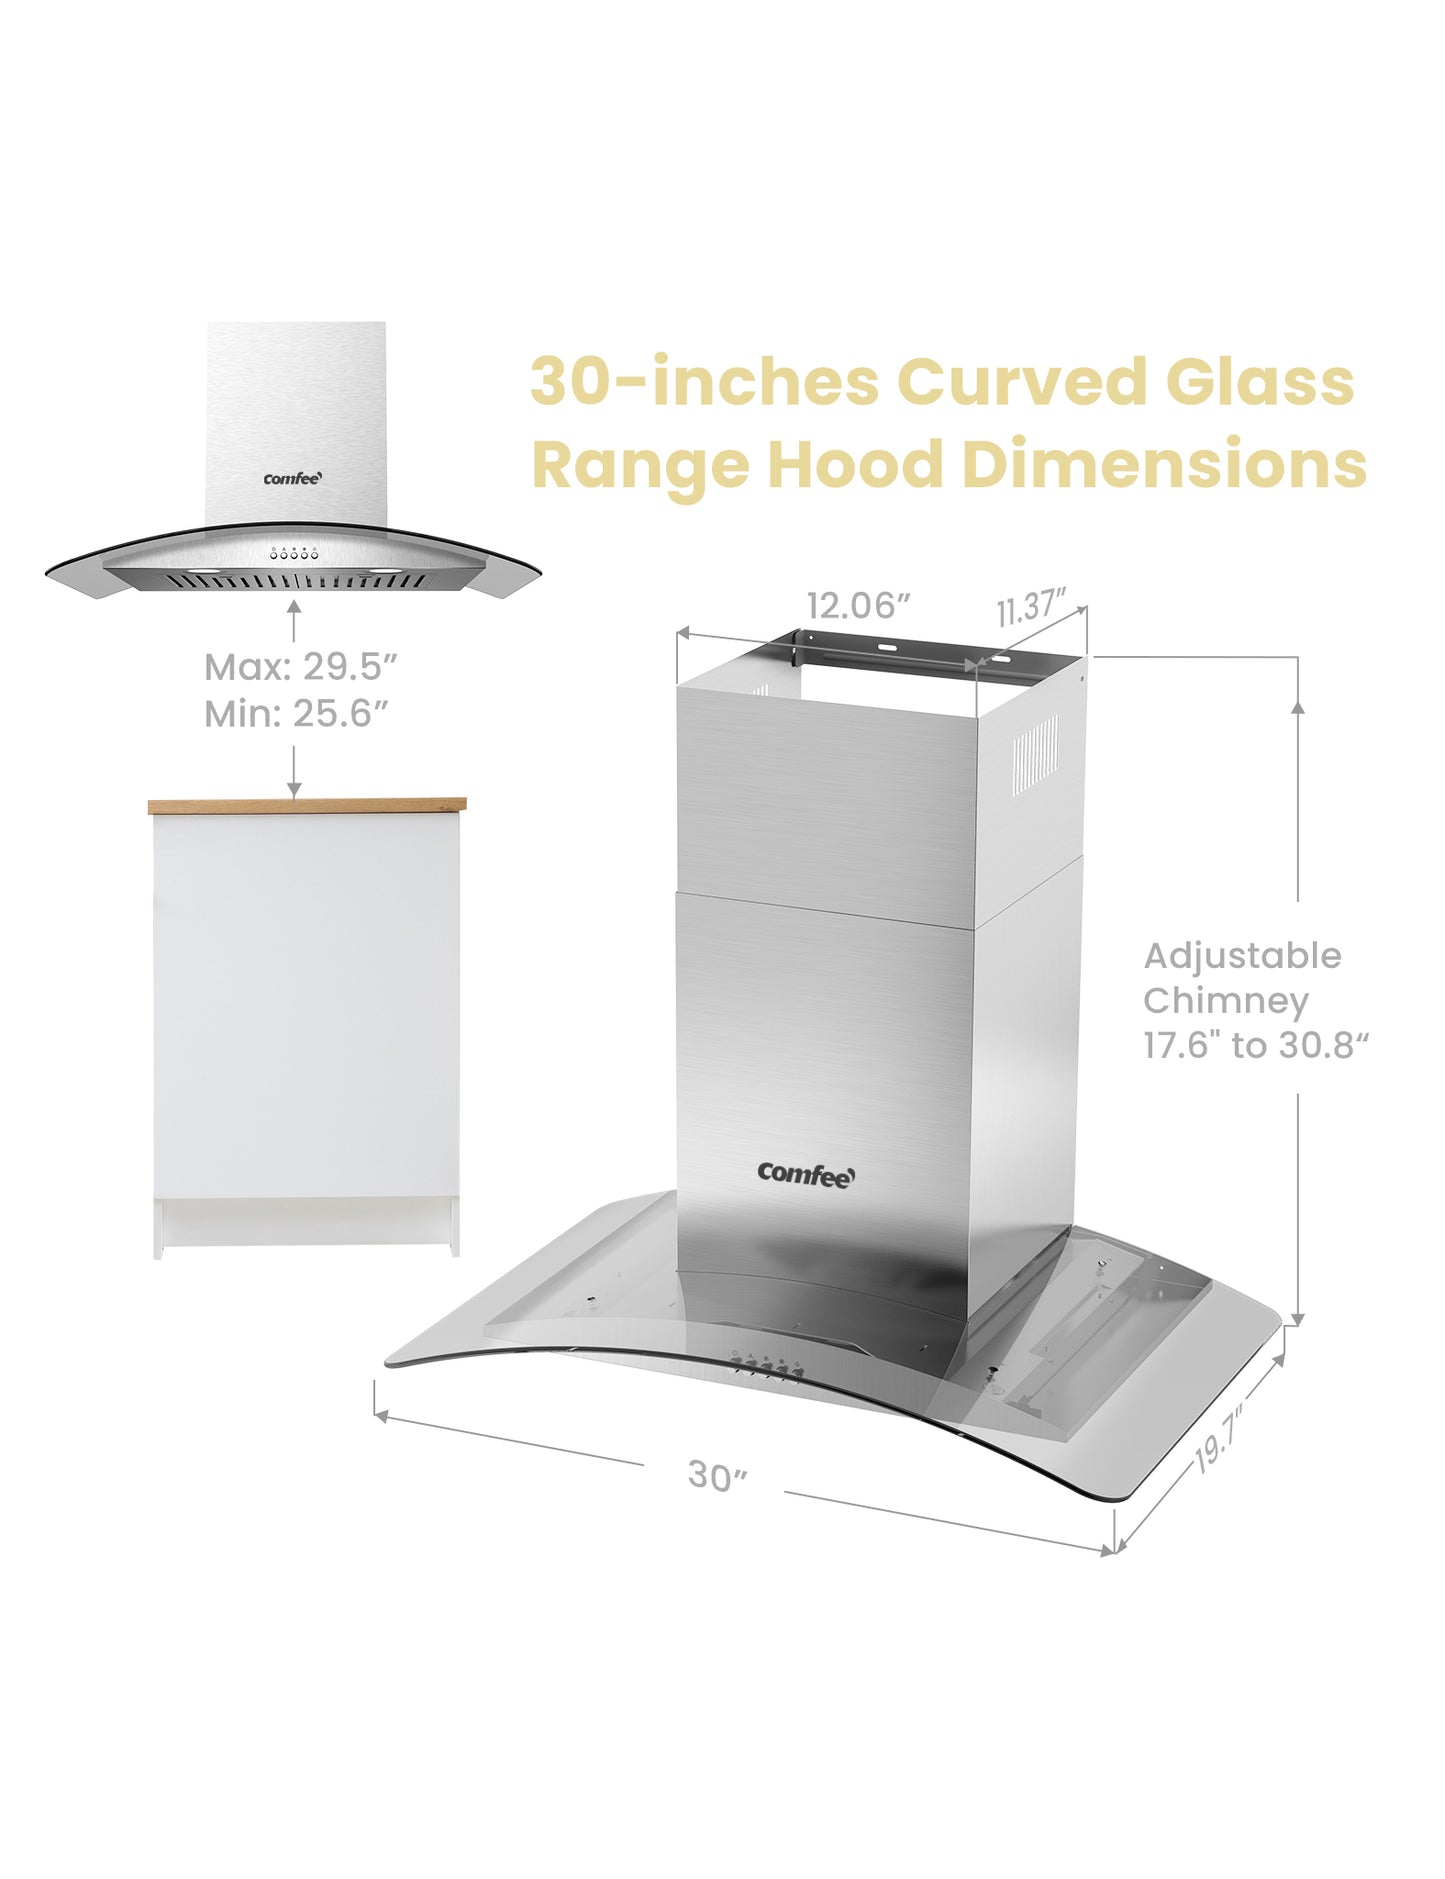 size dimensions of comfee curved glass range hood